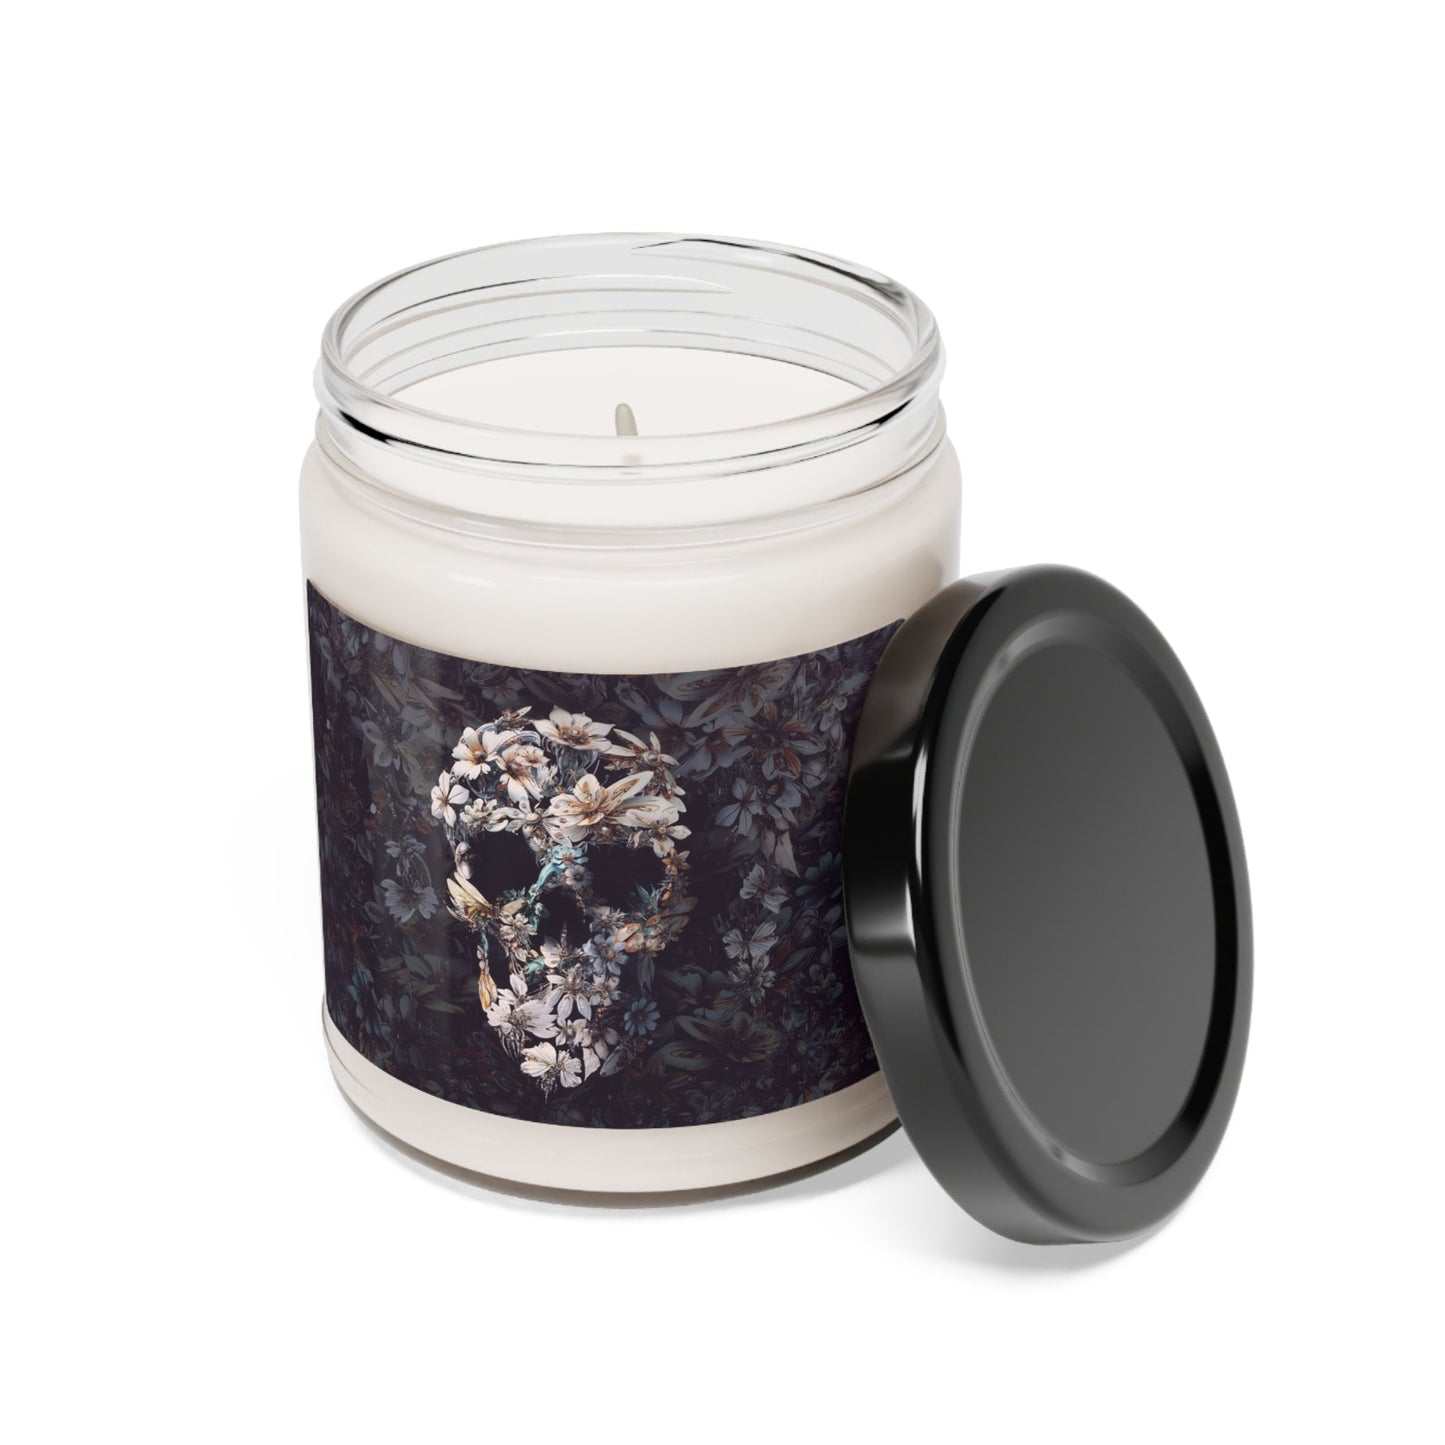 Gothic Scented Soy Candle, 9oz, Aromatic Sugar Skull Print Candle Home Decor